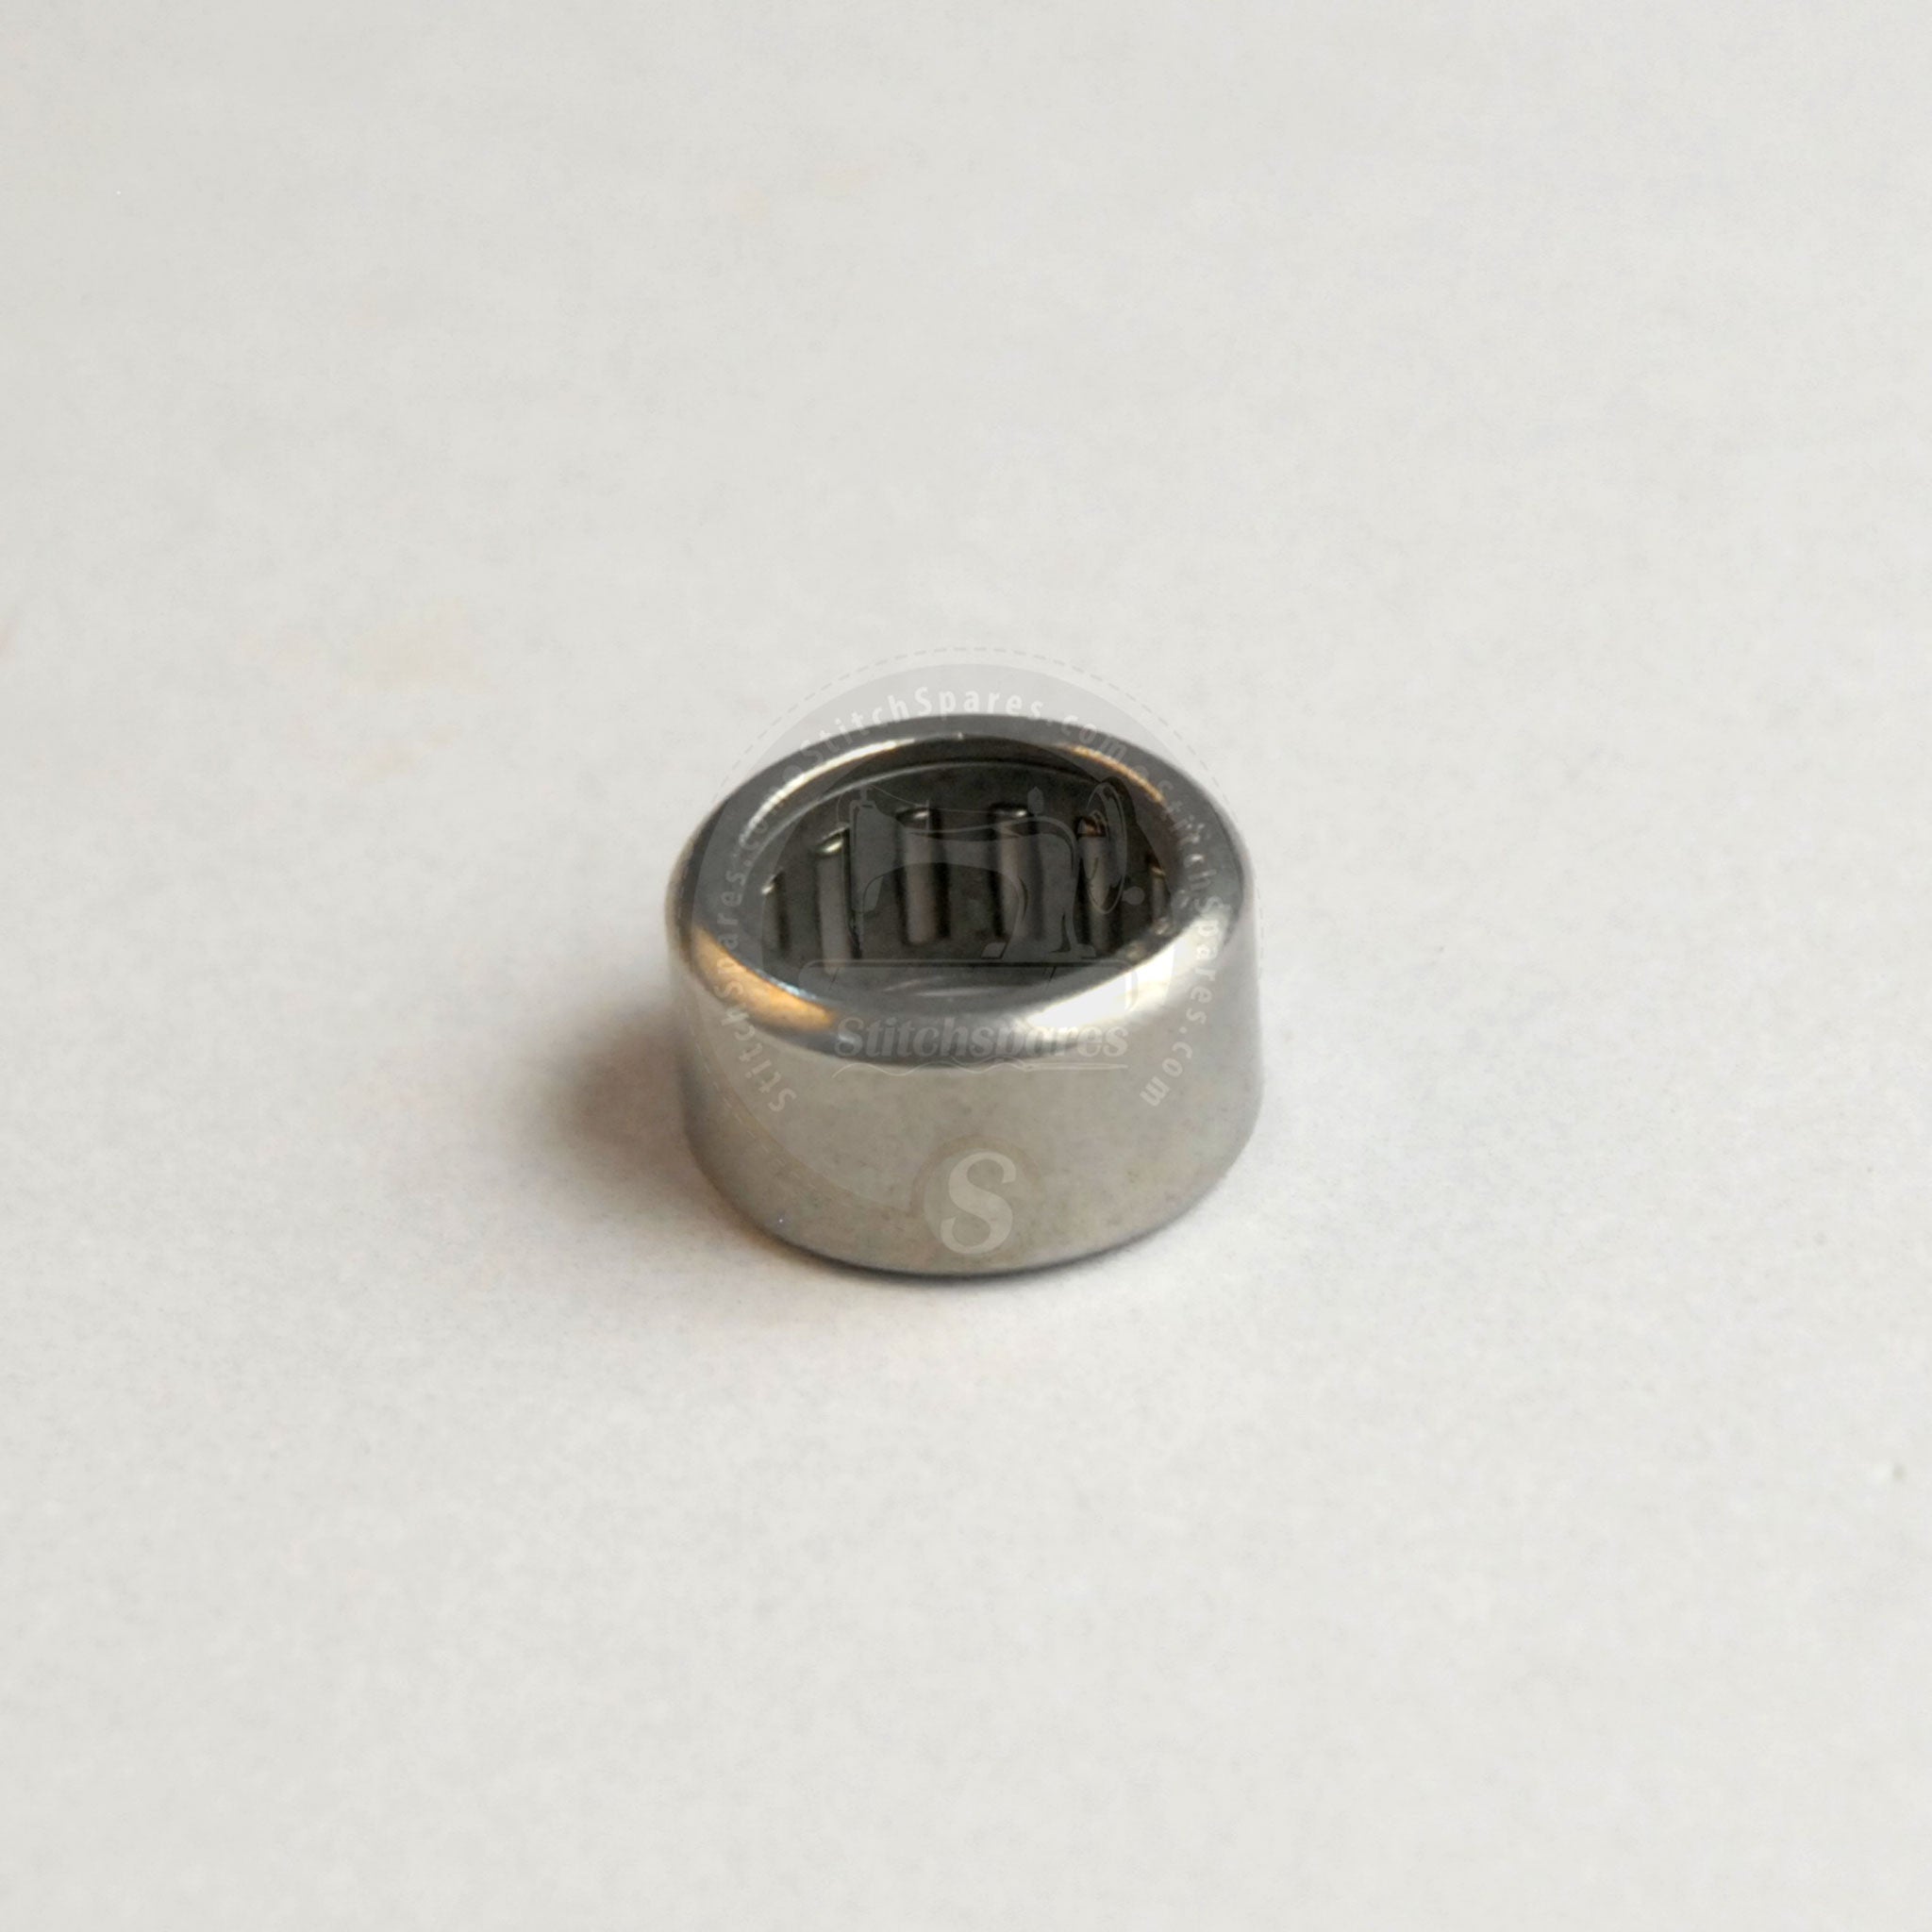 guangzhou easy operated button making hole| Alibaba.com